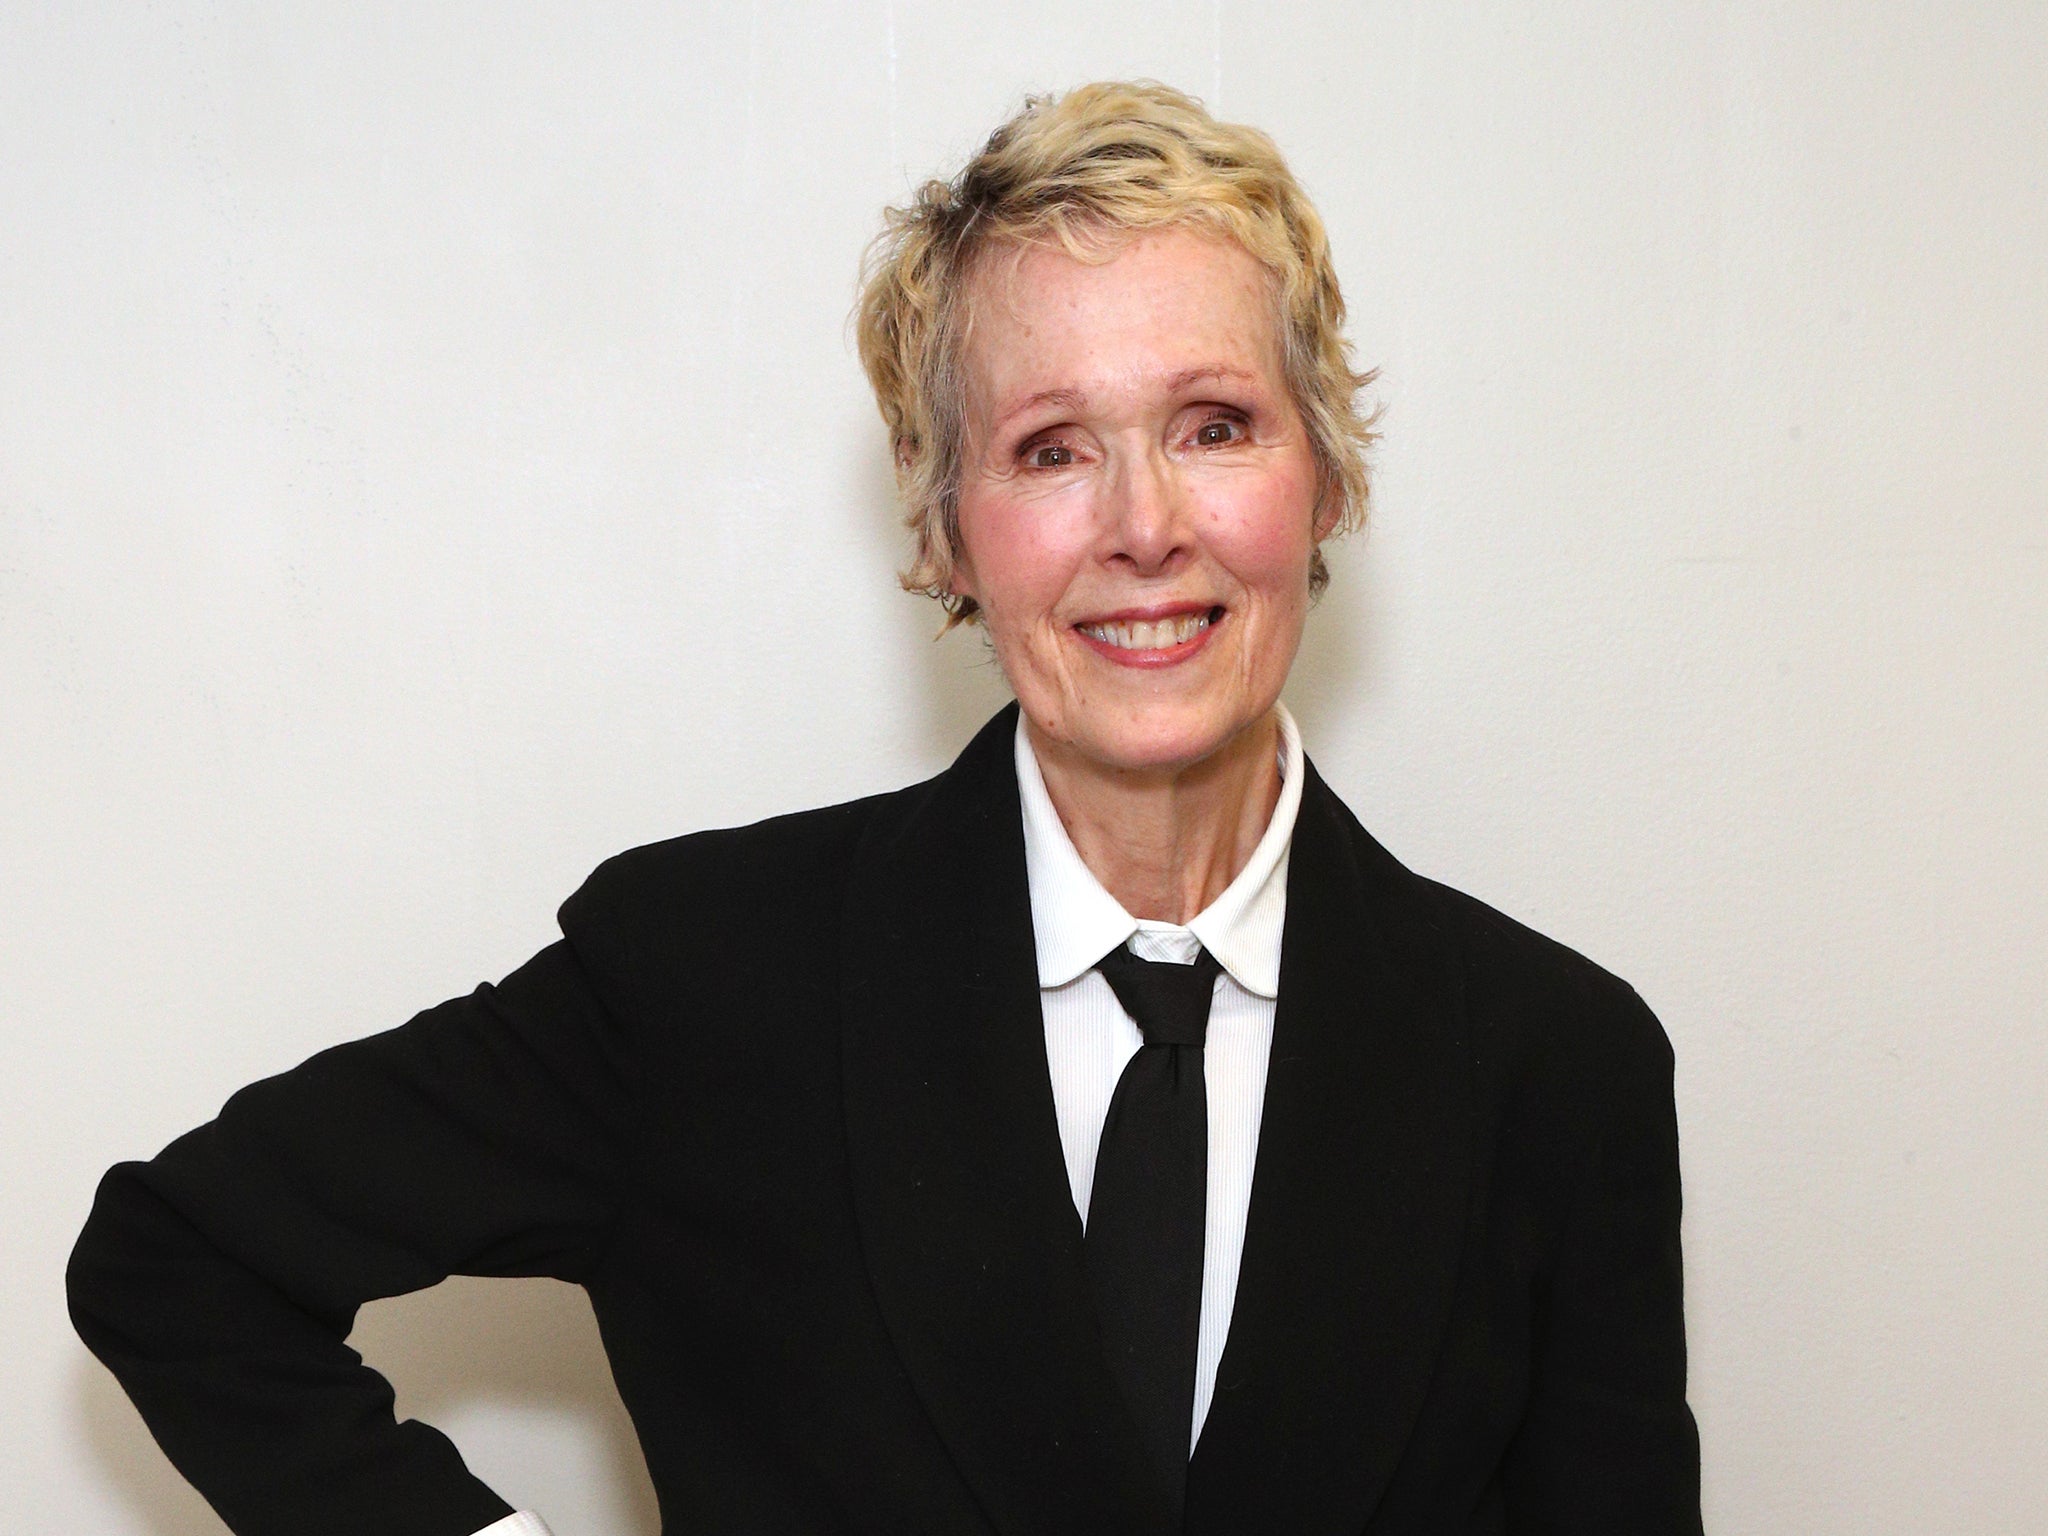 E Jean Carroll attends the 2019 Glamour Women of the Year Summit on 10 November 2019 in New York City.